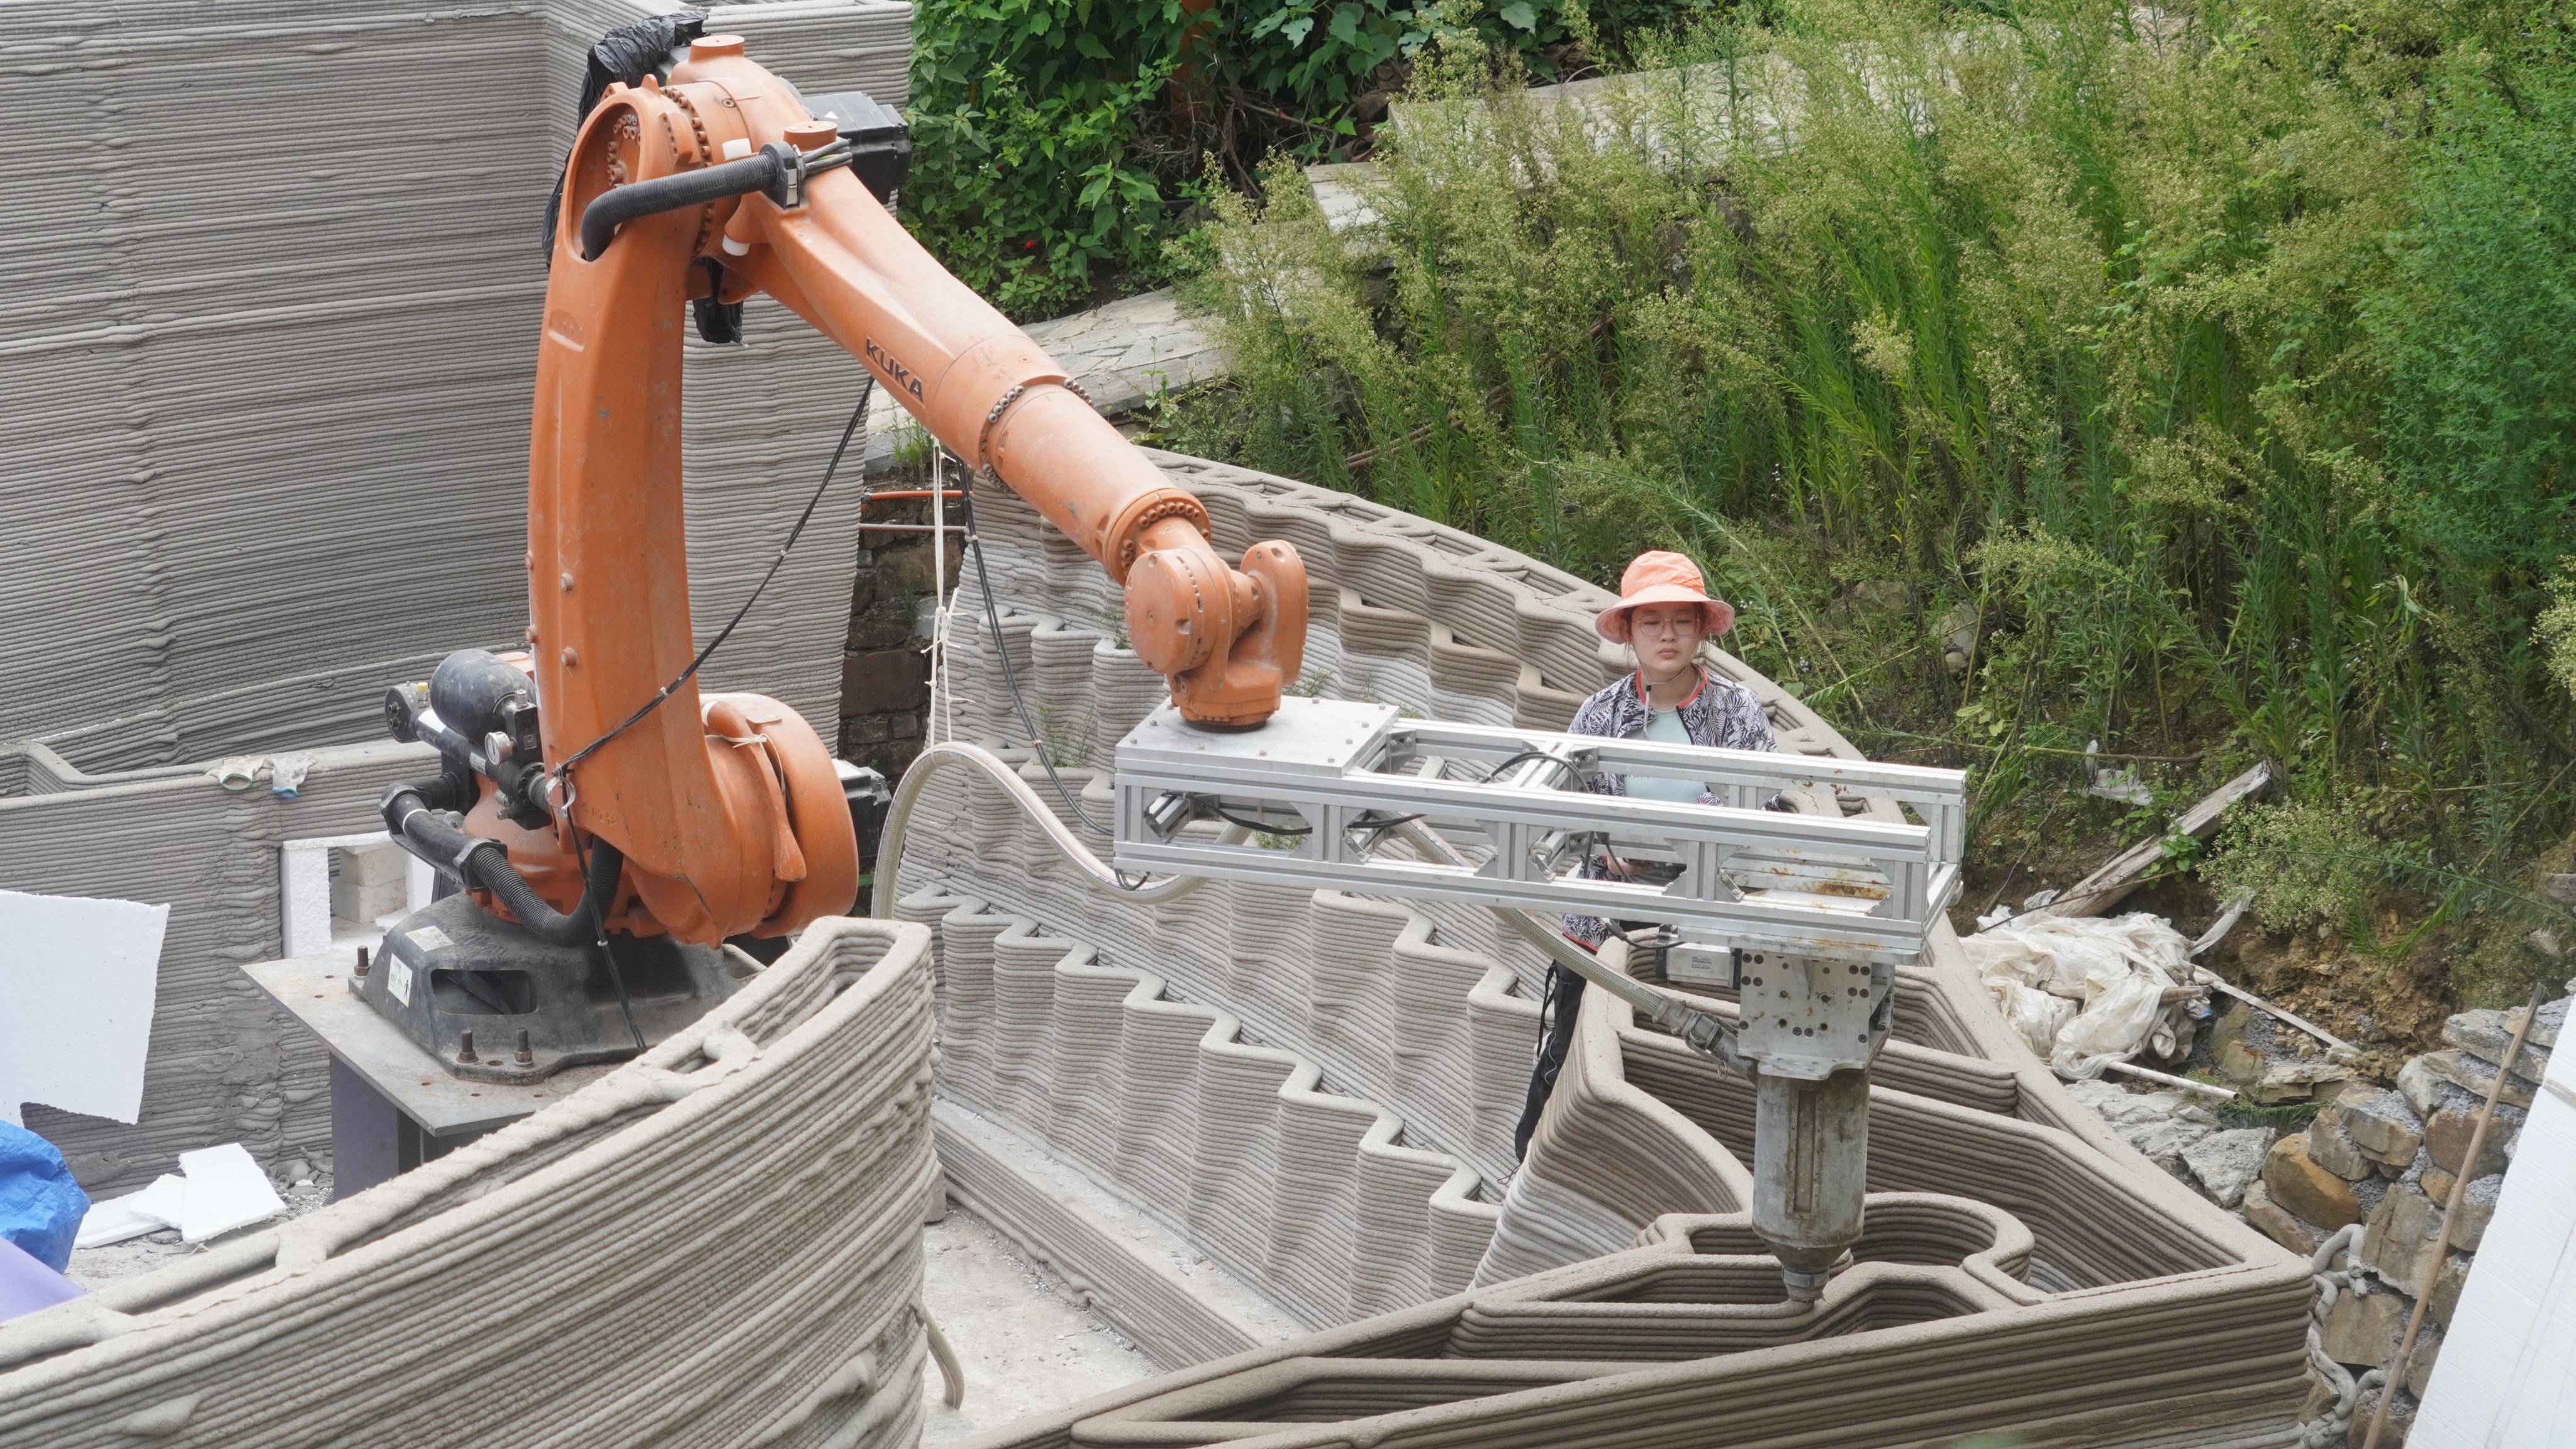 Concrete mixture is pumped through a 3D printer mounted on a robot to build new walls for a traditional rural house in Nanlong village, in China’s Guizhou province, as part of a University of Hong Kong team’s efforts to revitalise structures in the village. Photo: John Lin and Lidia Ratoi